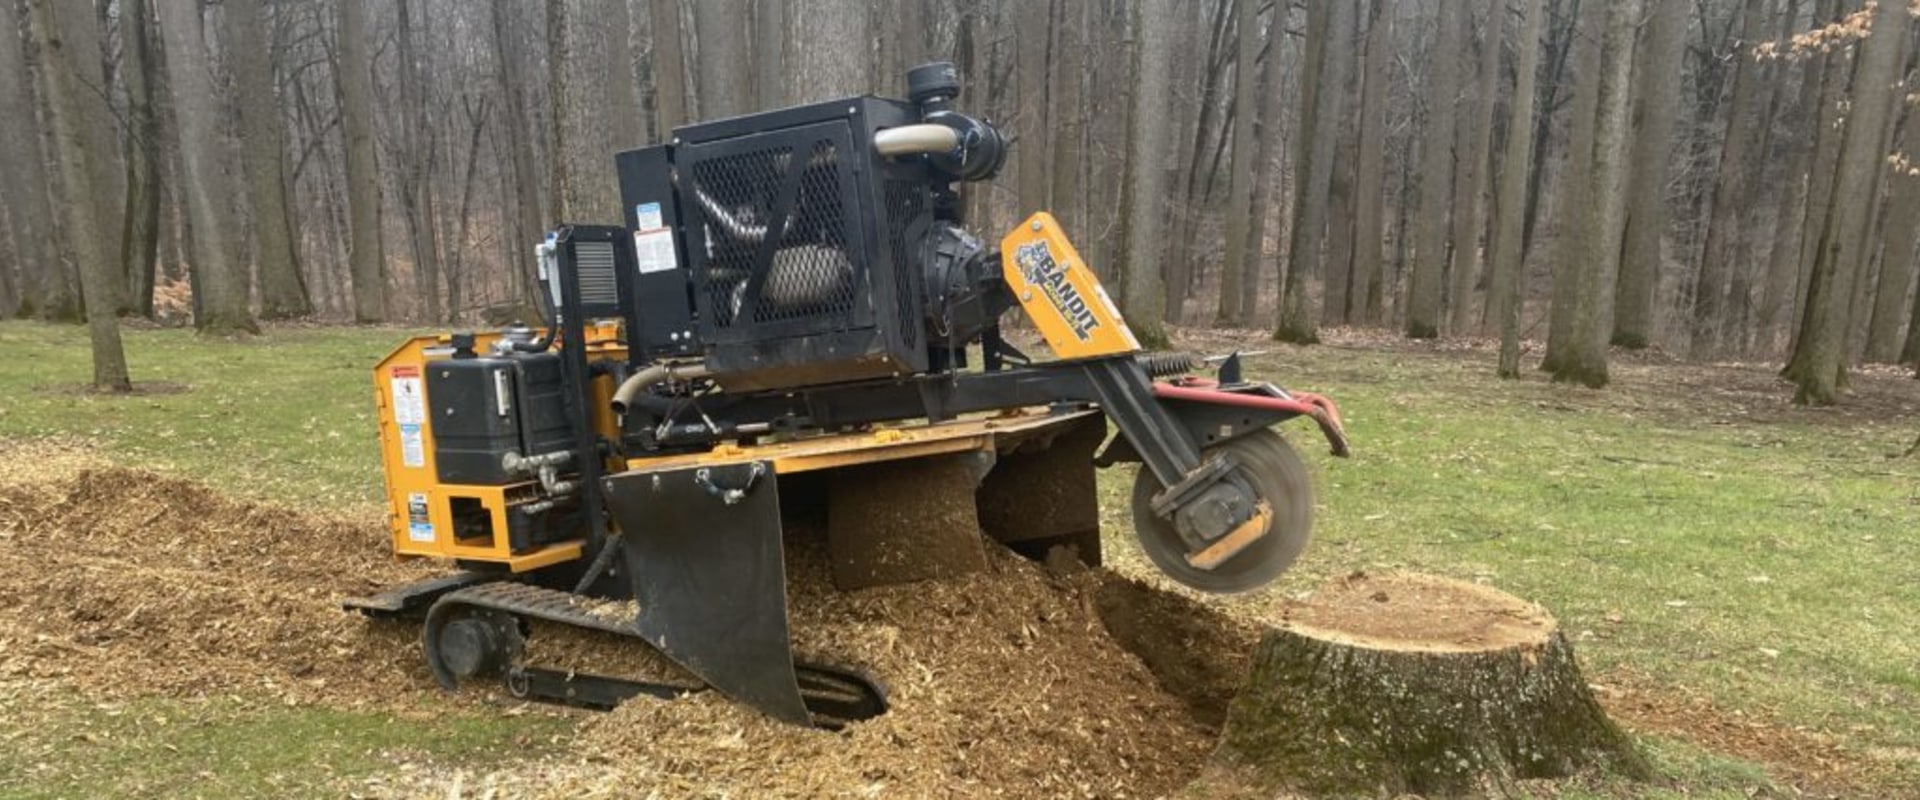 The Benefits of Stump Grinding: Why You Should Consider It